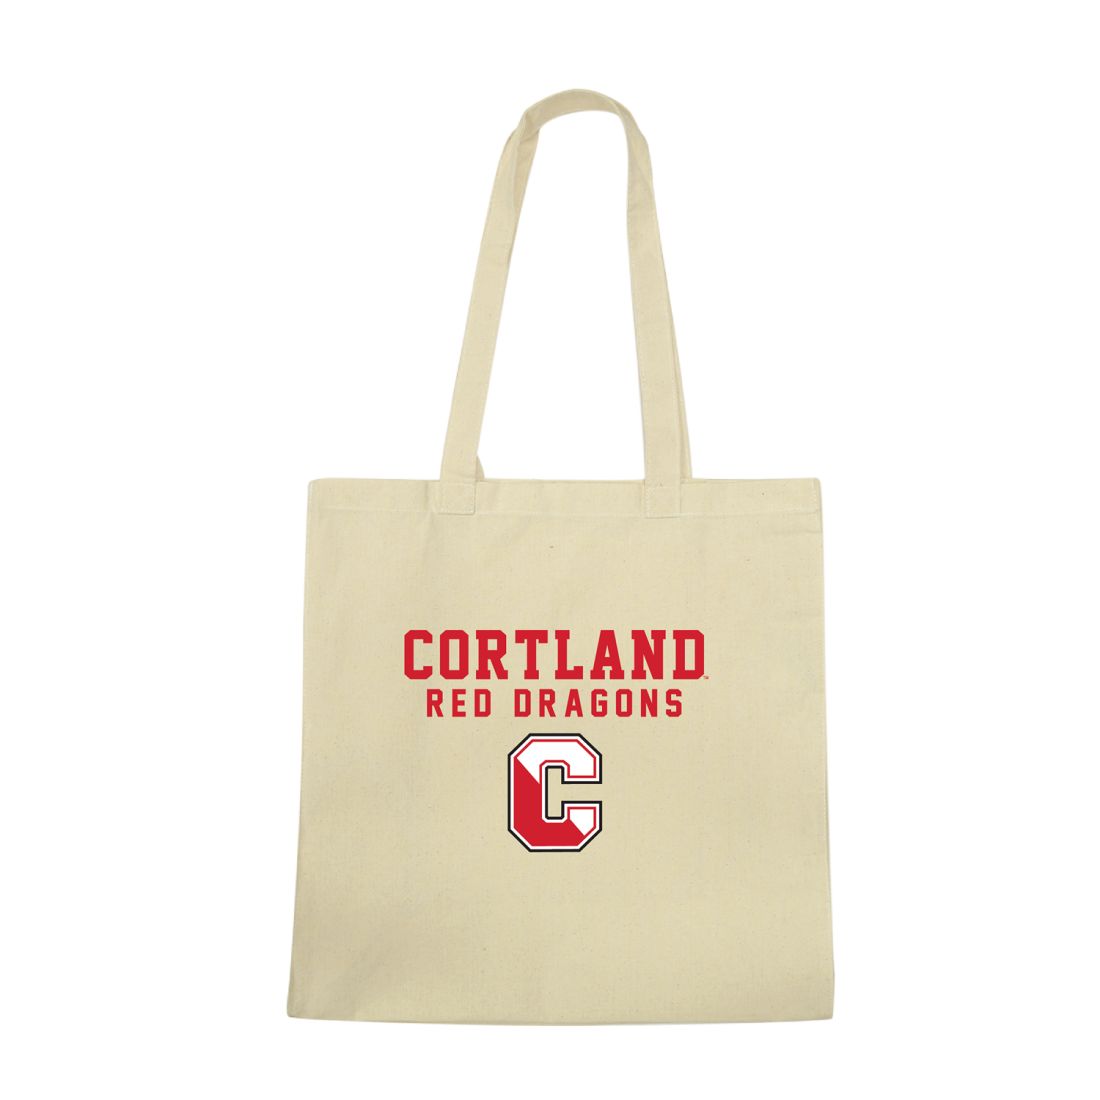 SUNY Cortland Red Dragons Institutional Seal Tote Bag